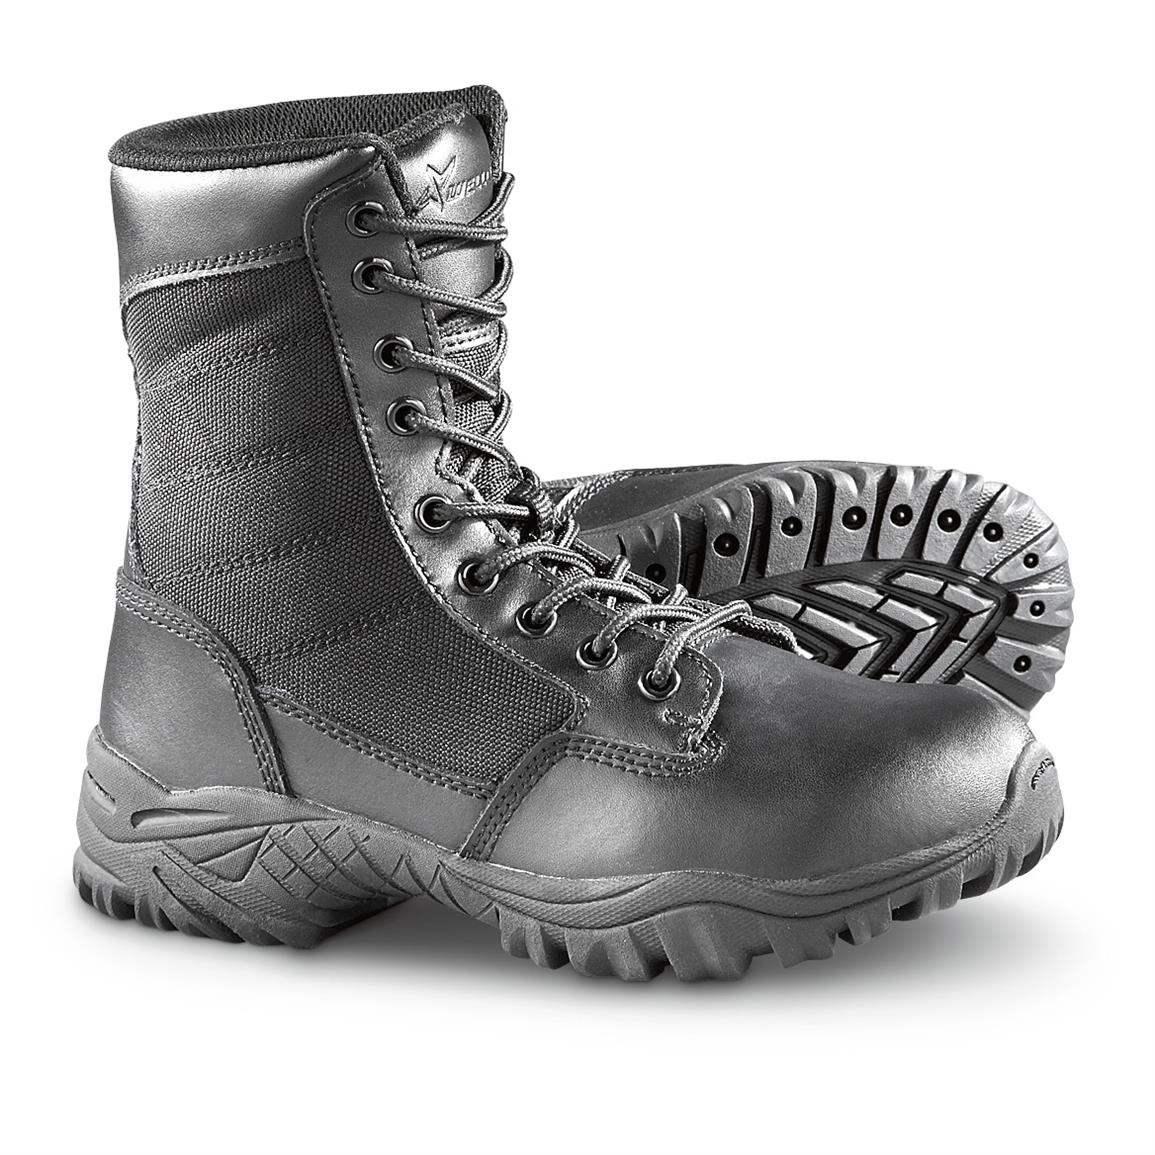 New U.S. Military Surplus Wellco Tactical Boots - 622295, Combat & Tactical Boots at Sportsman's 